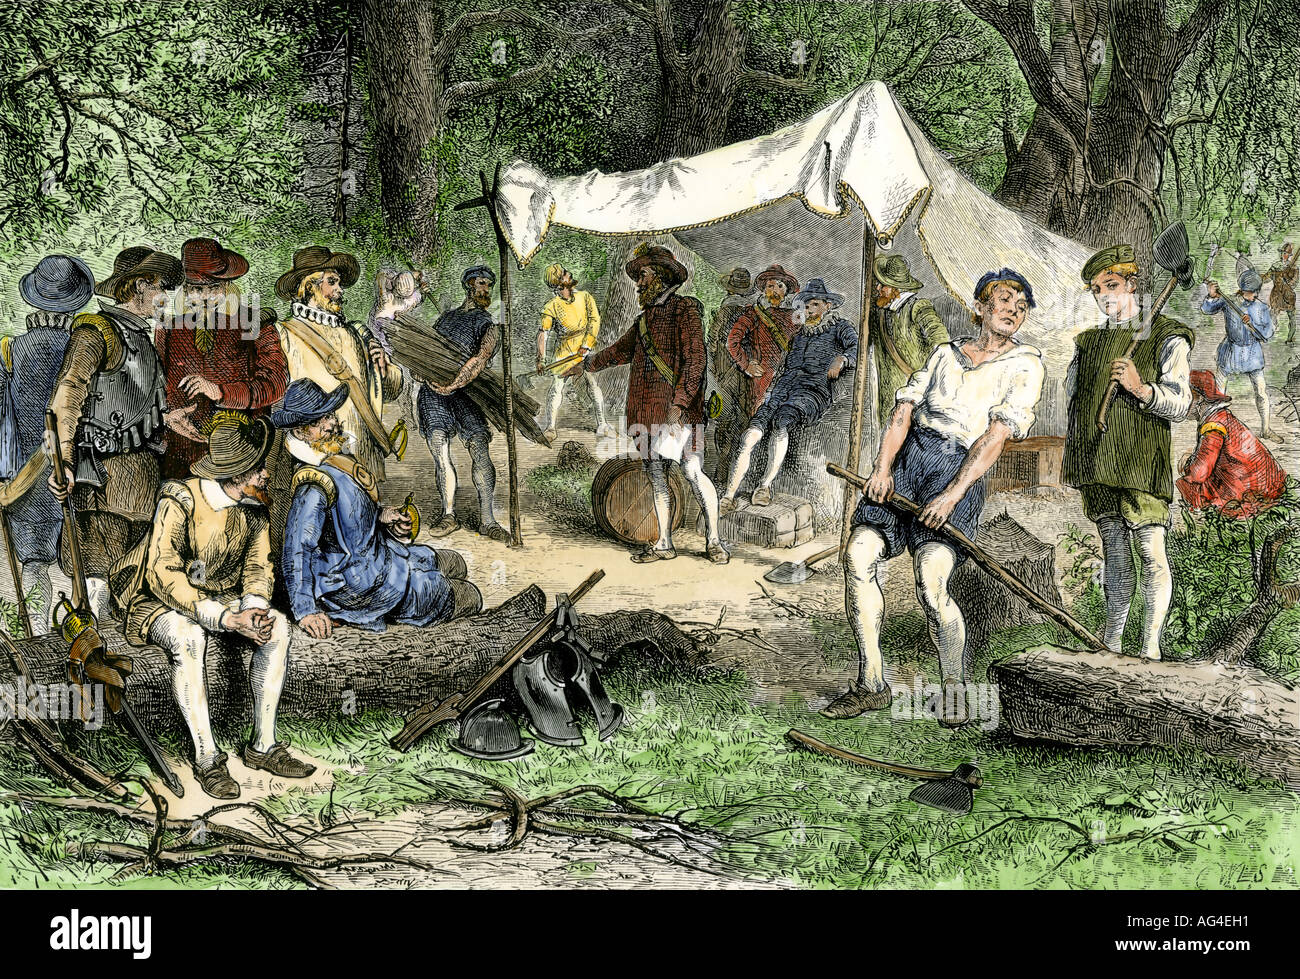 Virginia colonists building the first structures at Jamestown 1608. Hand-colored woodcut Stock Photo